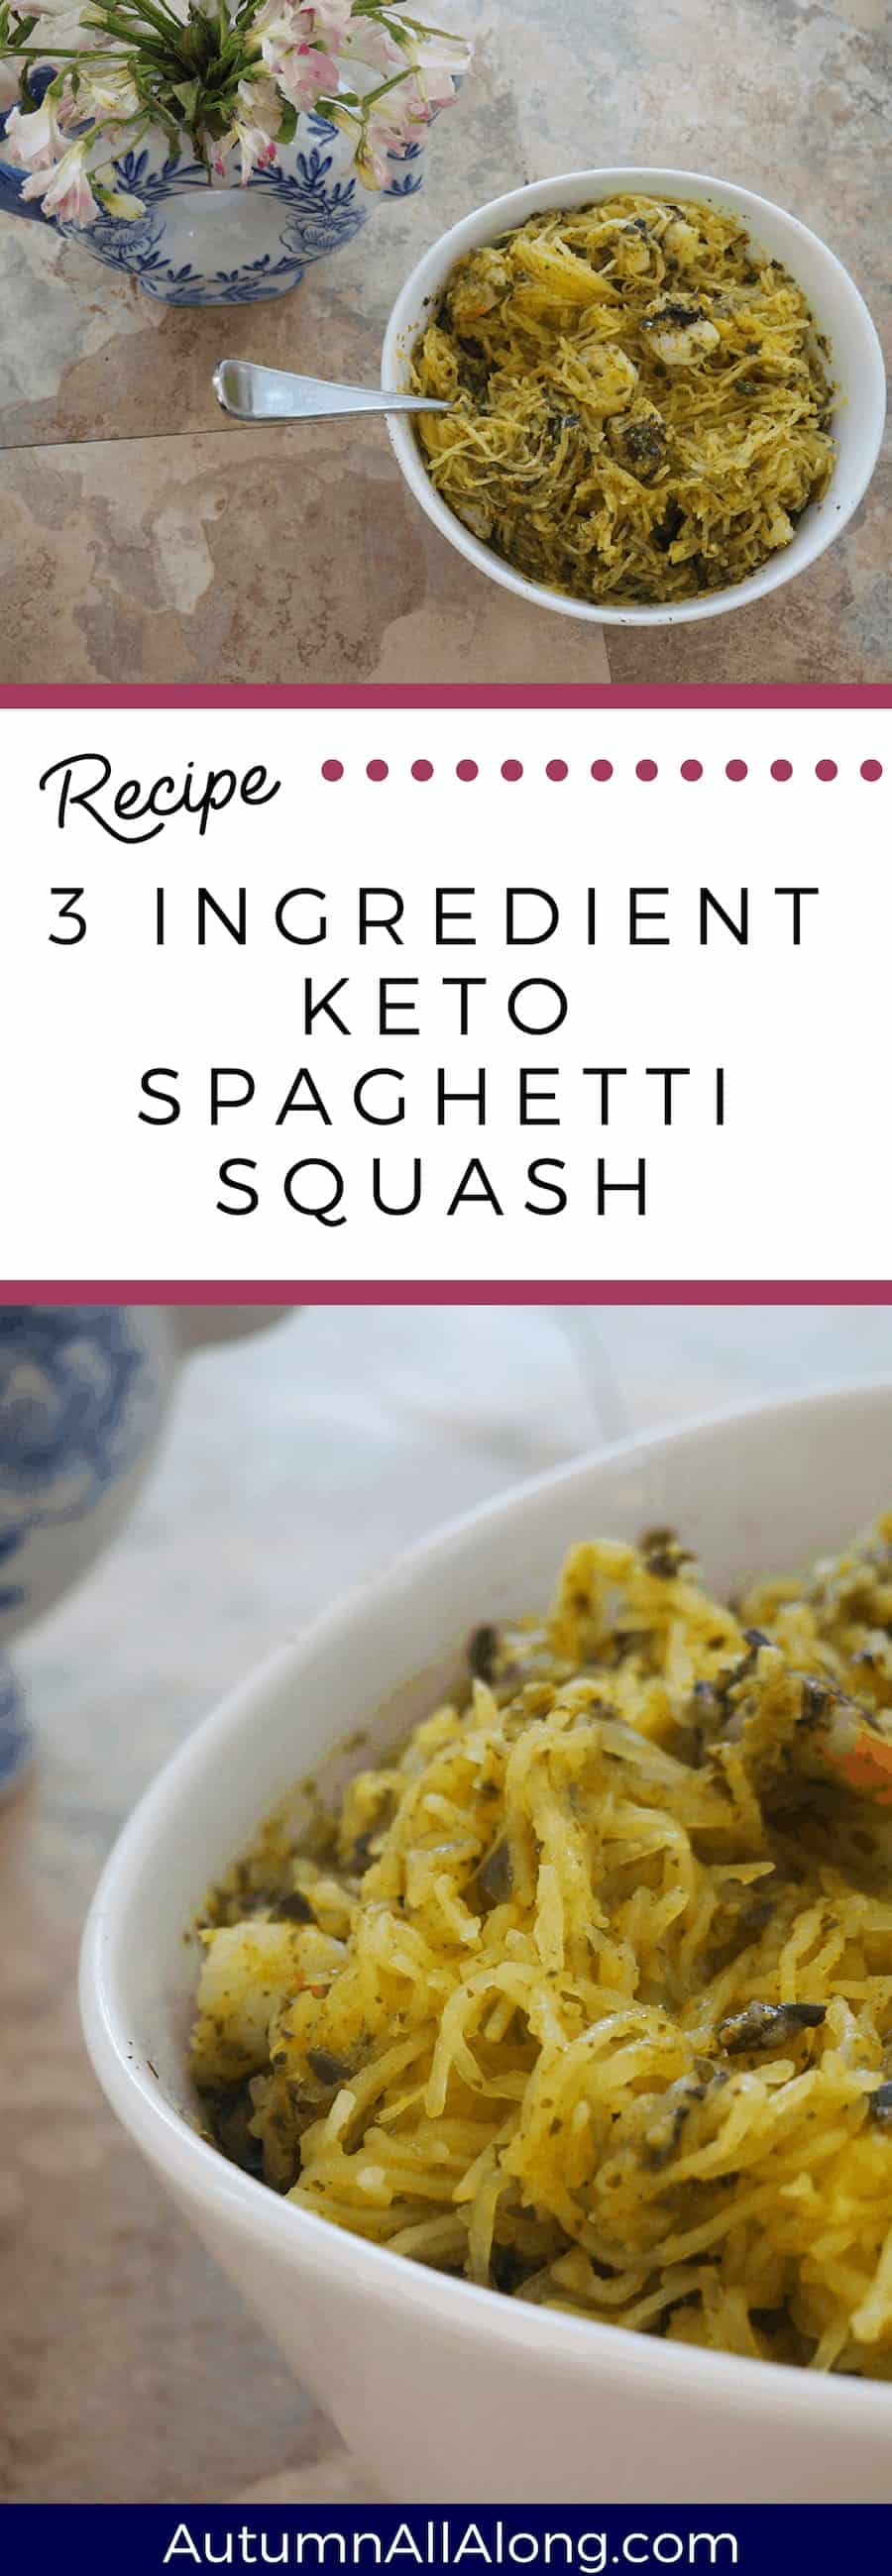 This recipe is keto friendly and easy to make. This 3 ingredient is simple without sacrificing flavor. | via Autumn All Along